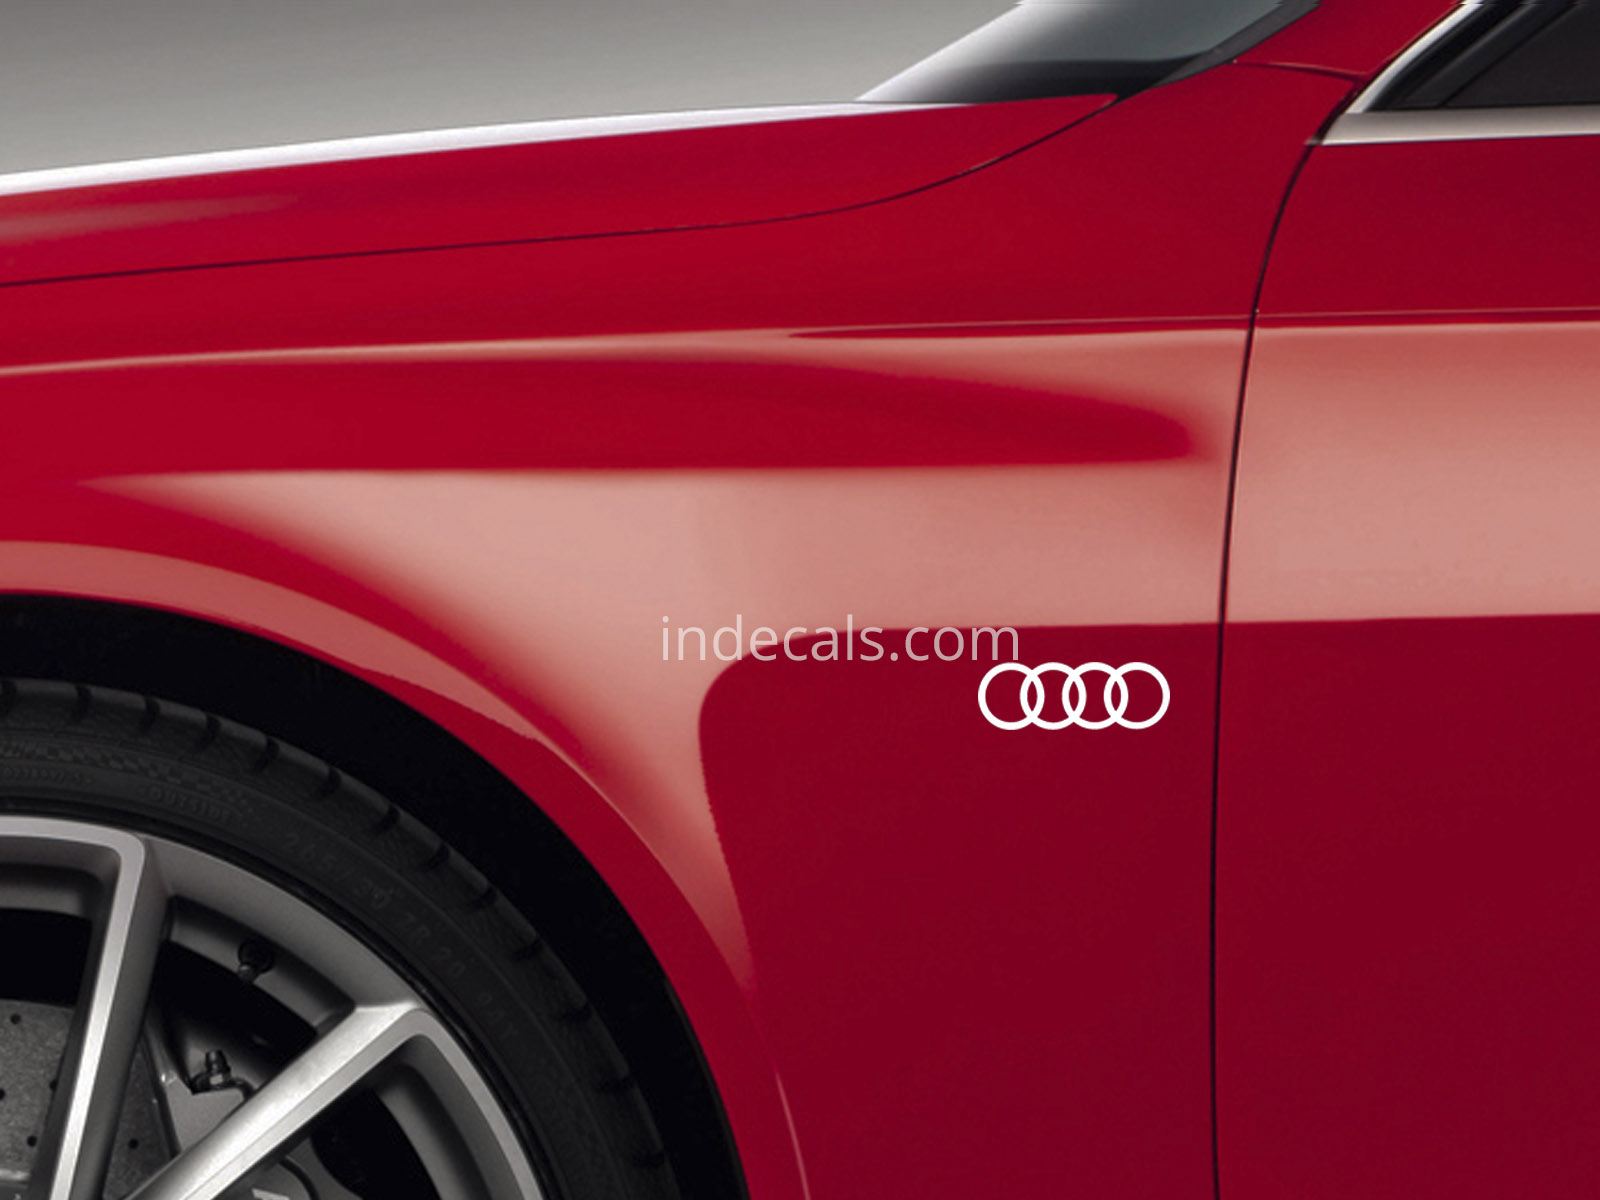 3 x Audi Rings Stickers for Wings - White